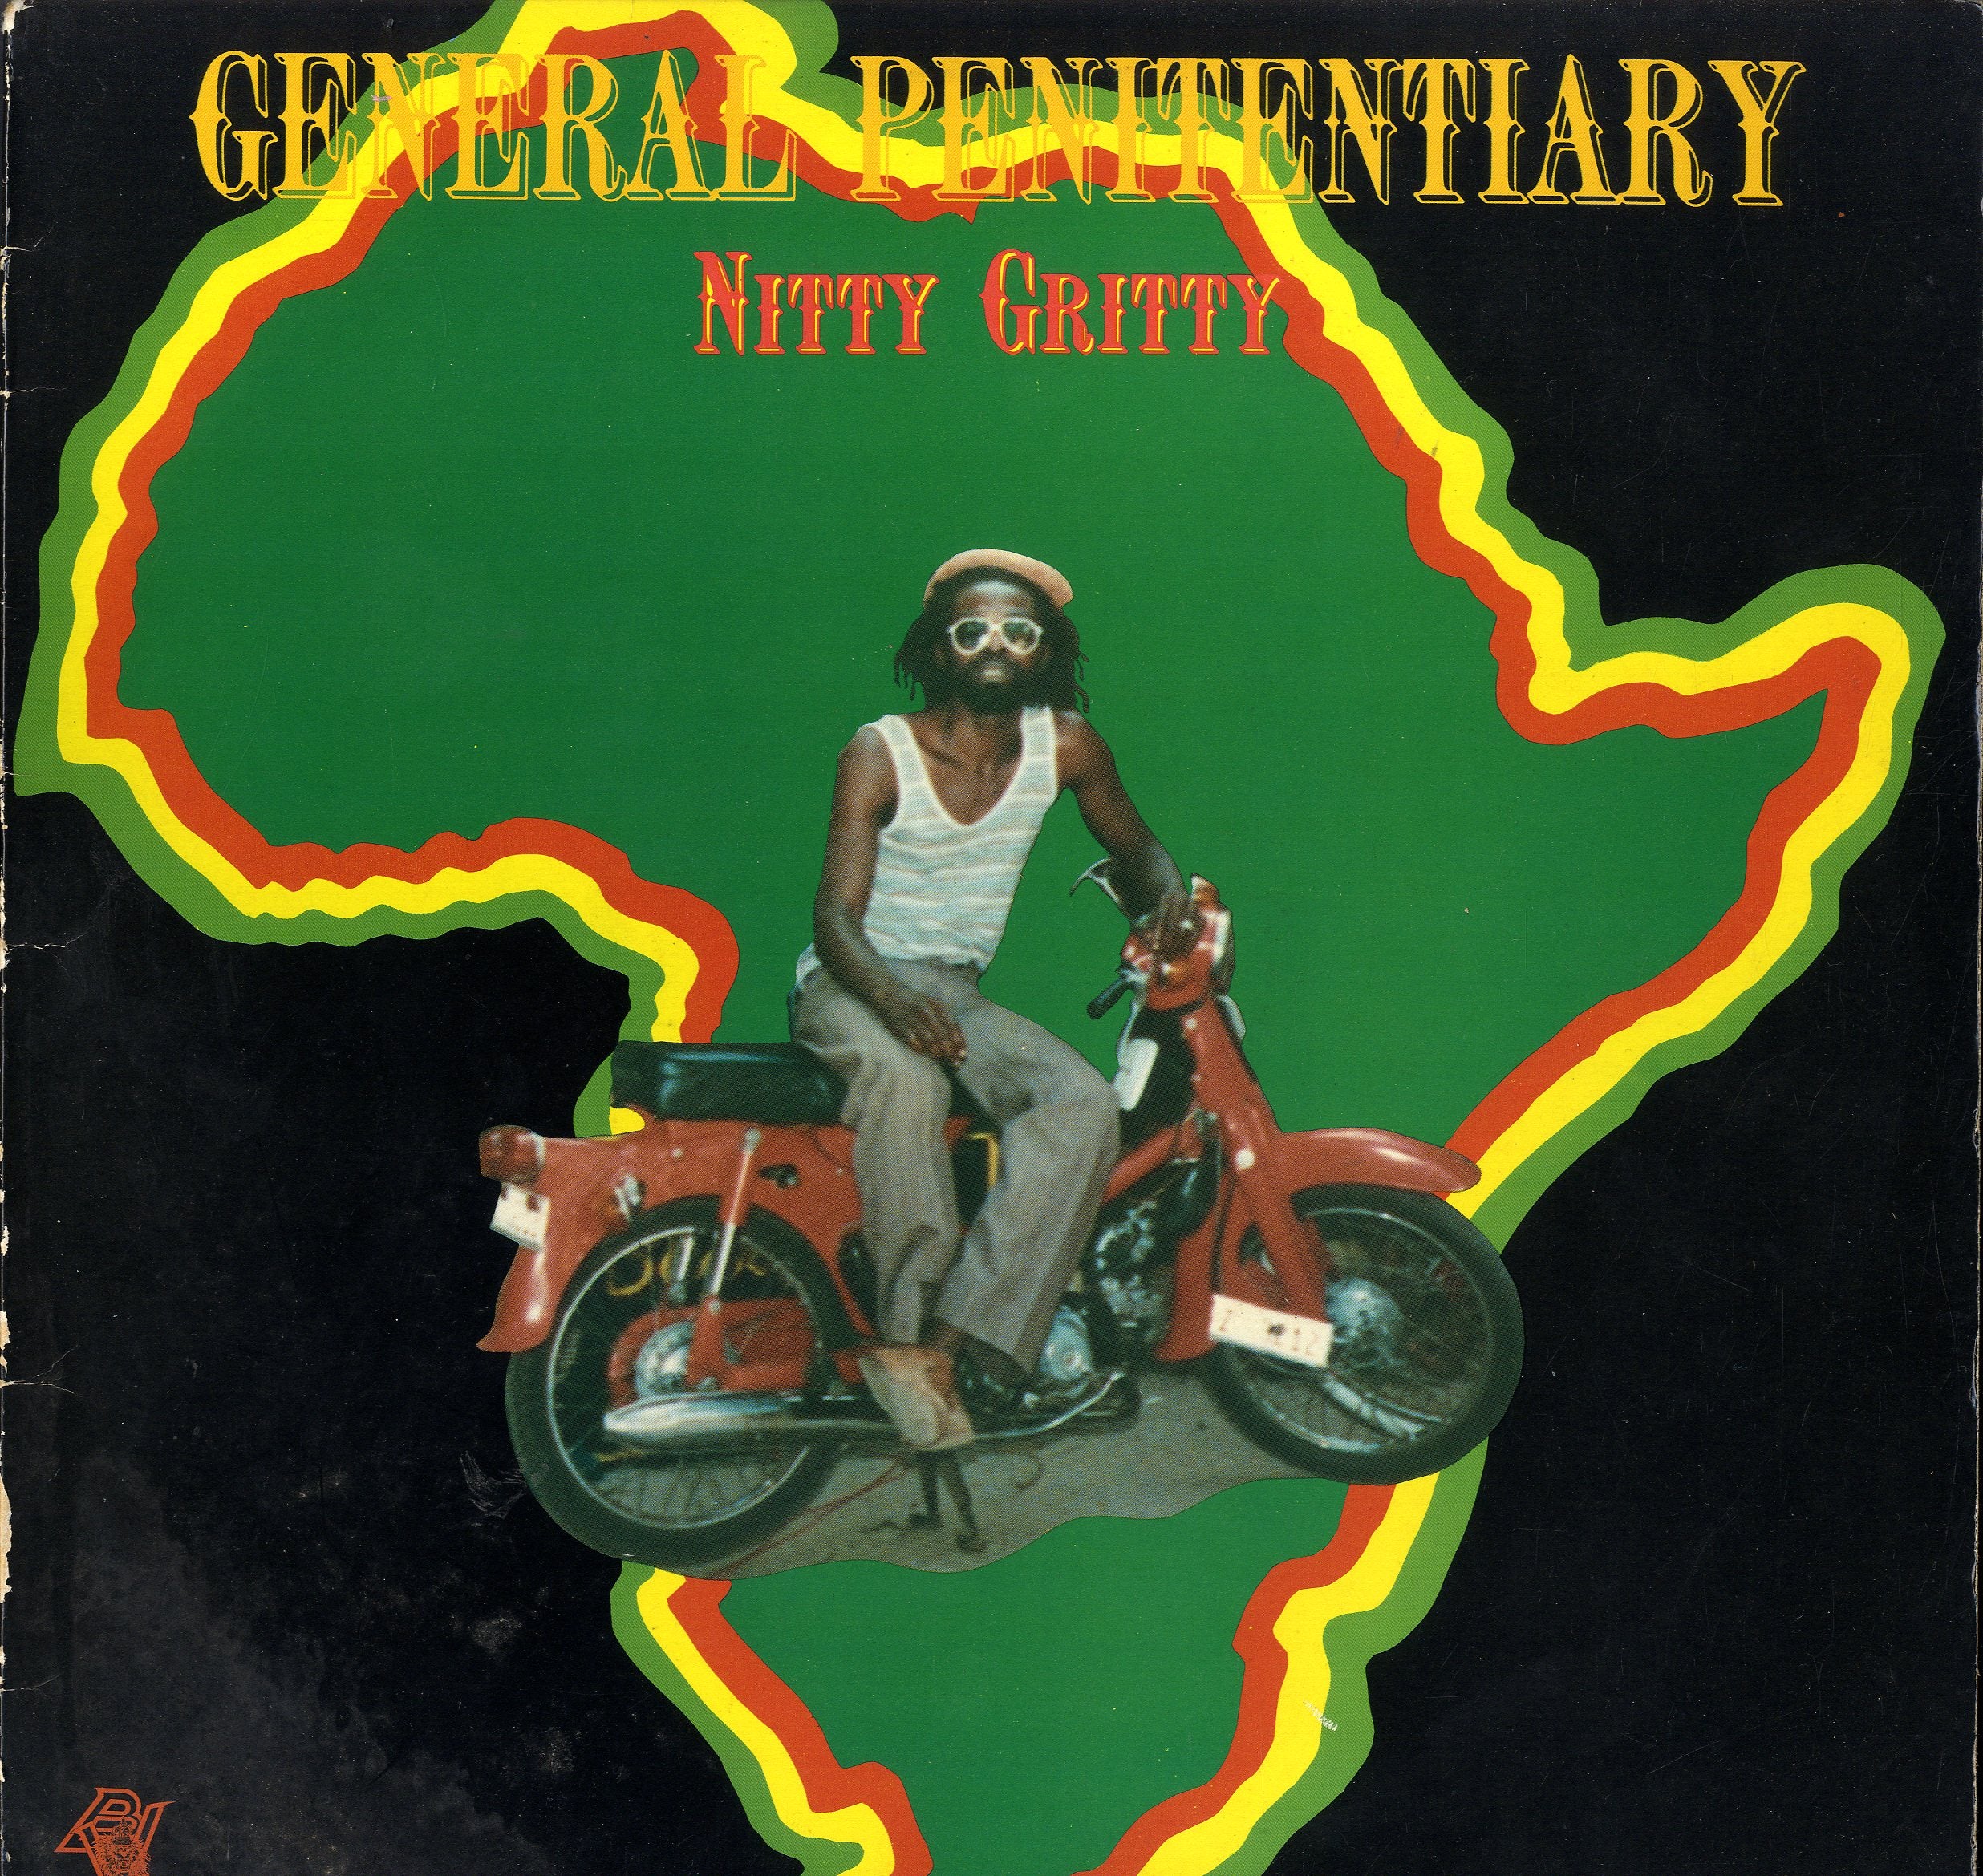 NITTY GRITTY [General Penitentiary]